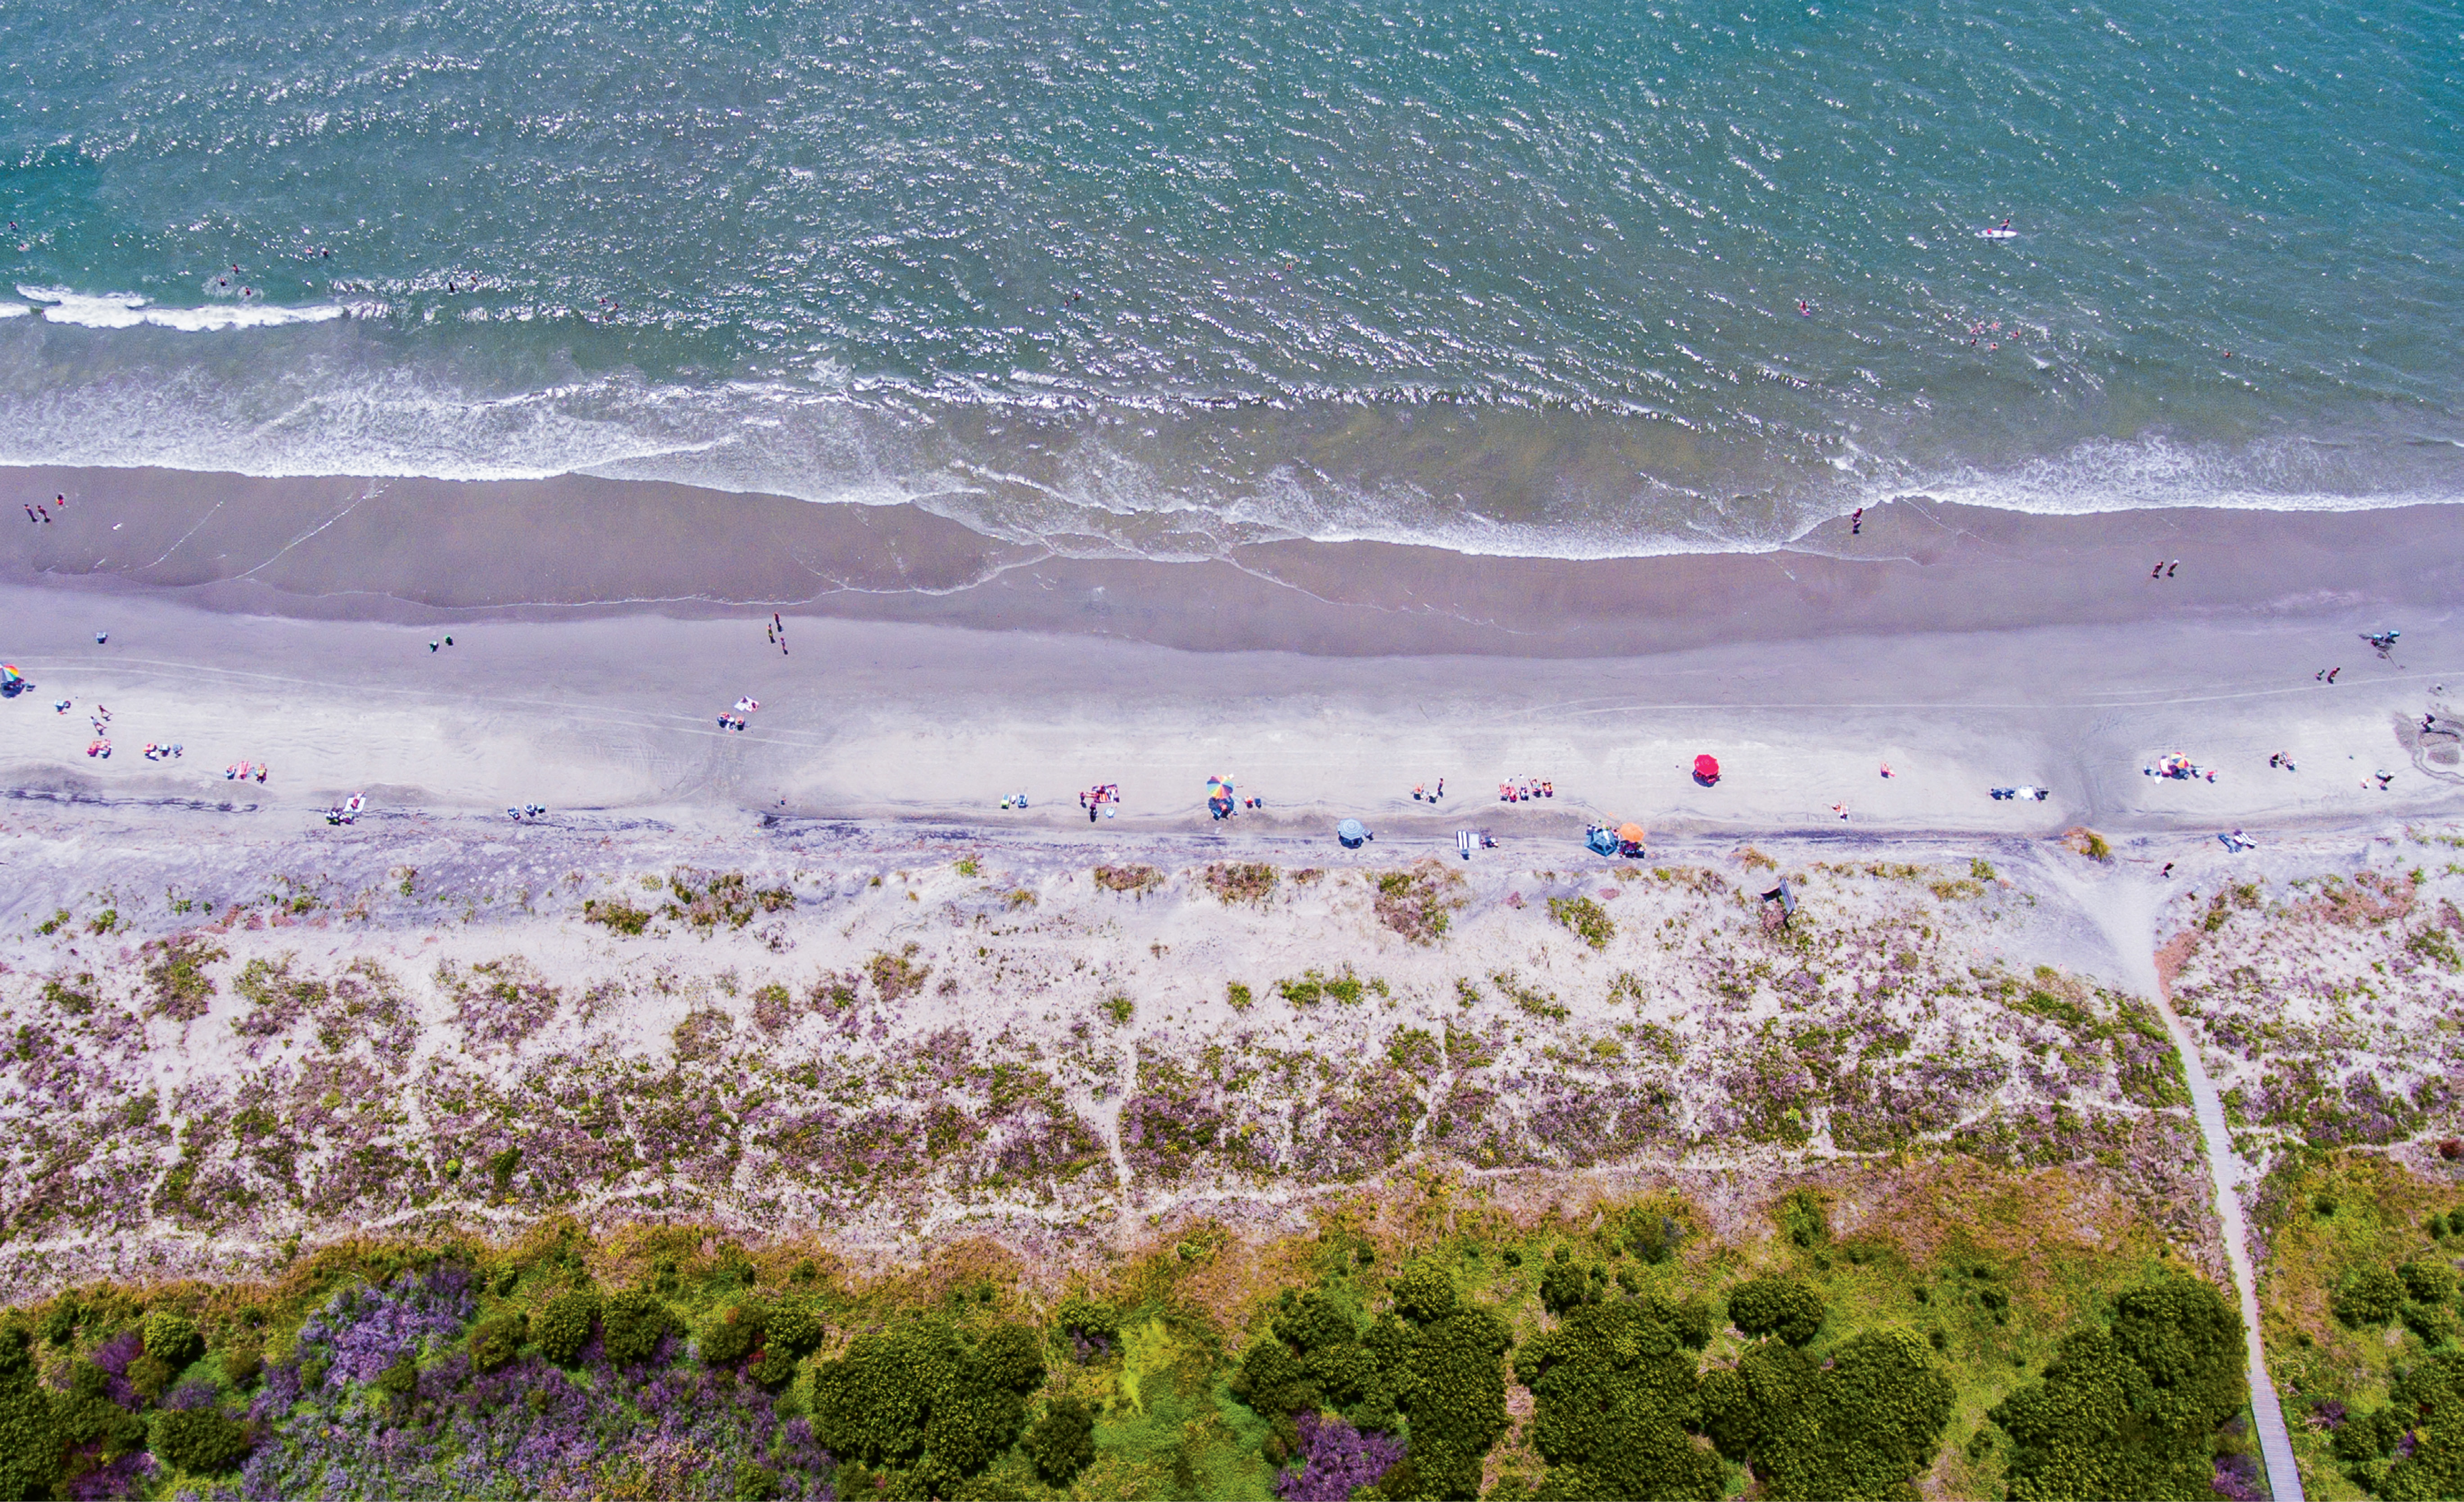 “Beach Day on Sully’s” {Altitude: 350 feet}  Midday in early June near Station 25 on Sullivan’s Island